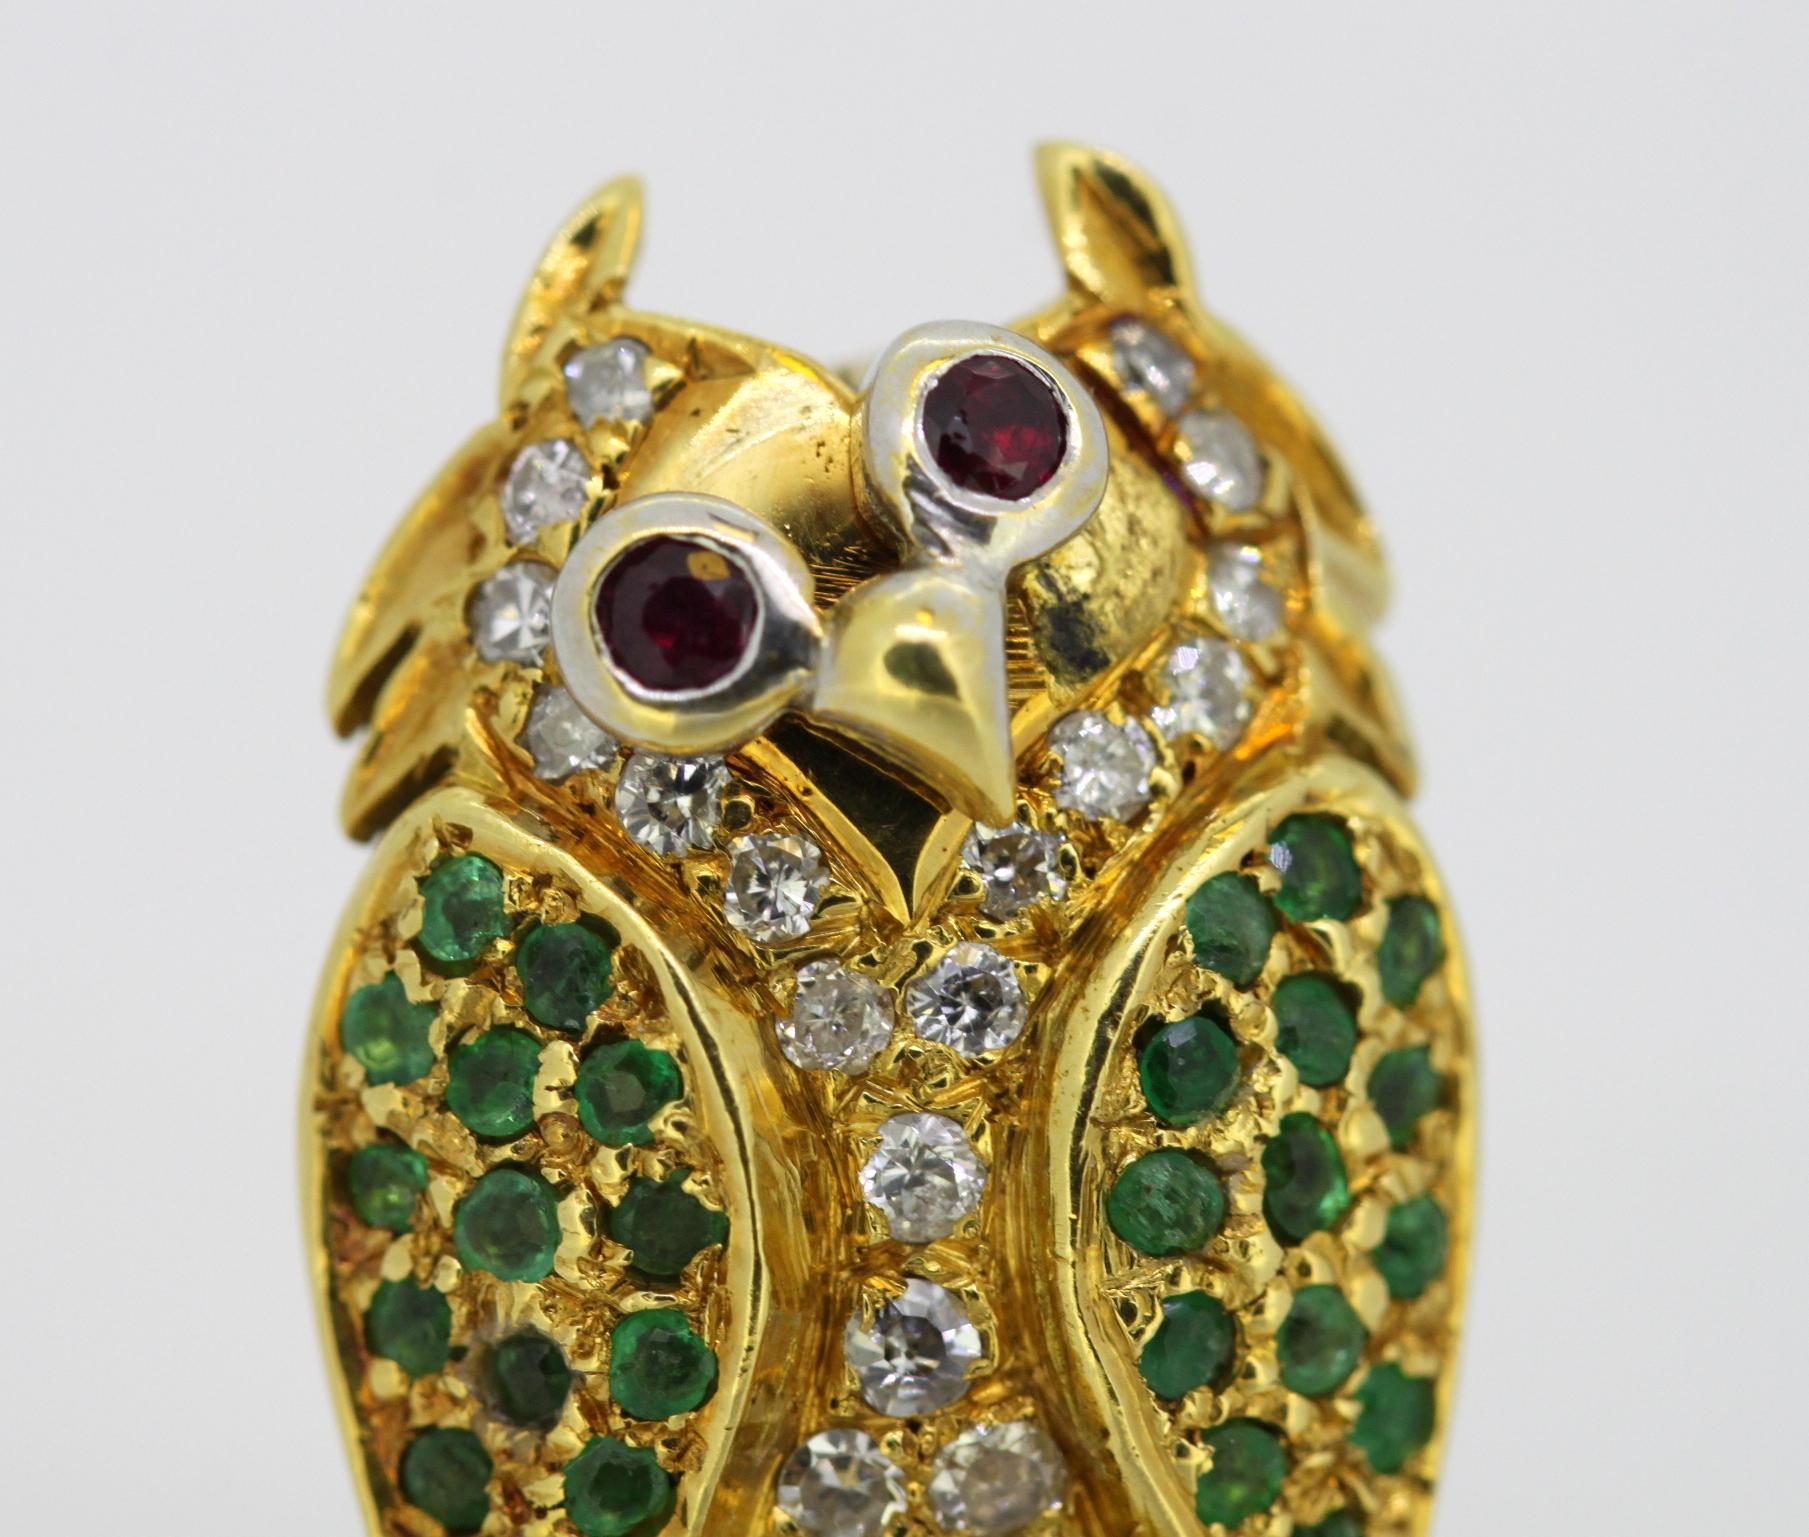 Women's or Men's Vintage 18 Karat Gold Owl Brooch with Diamonds, Emeralds and Rubies